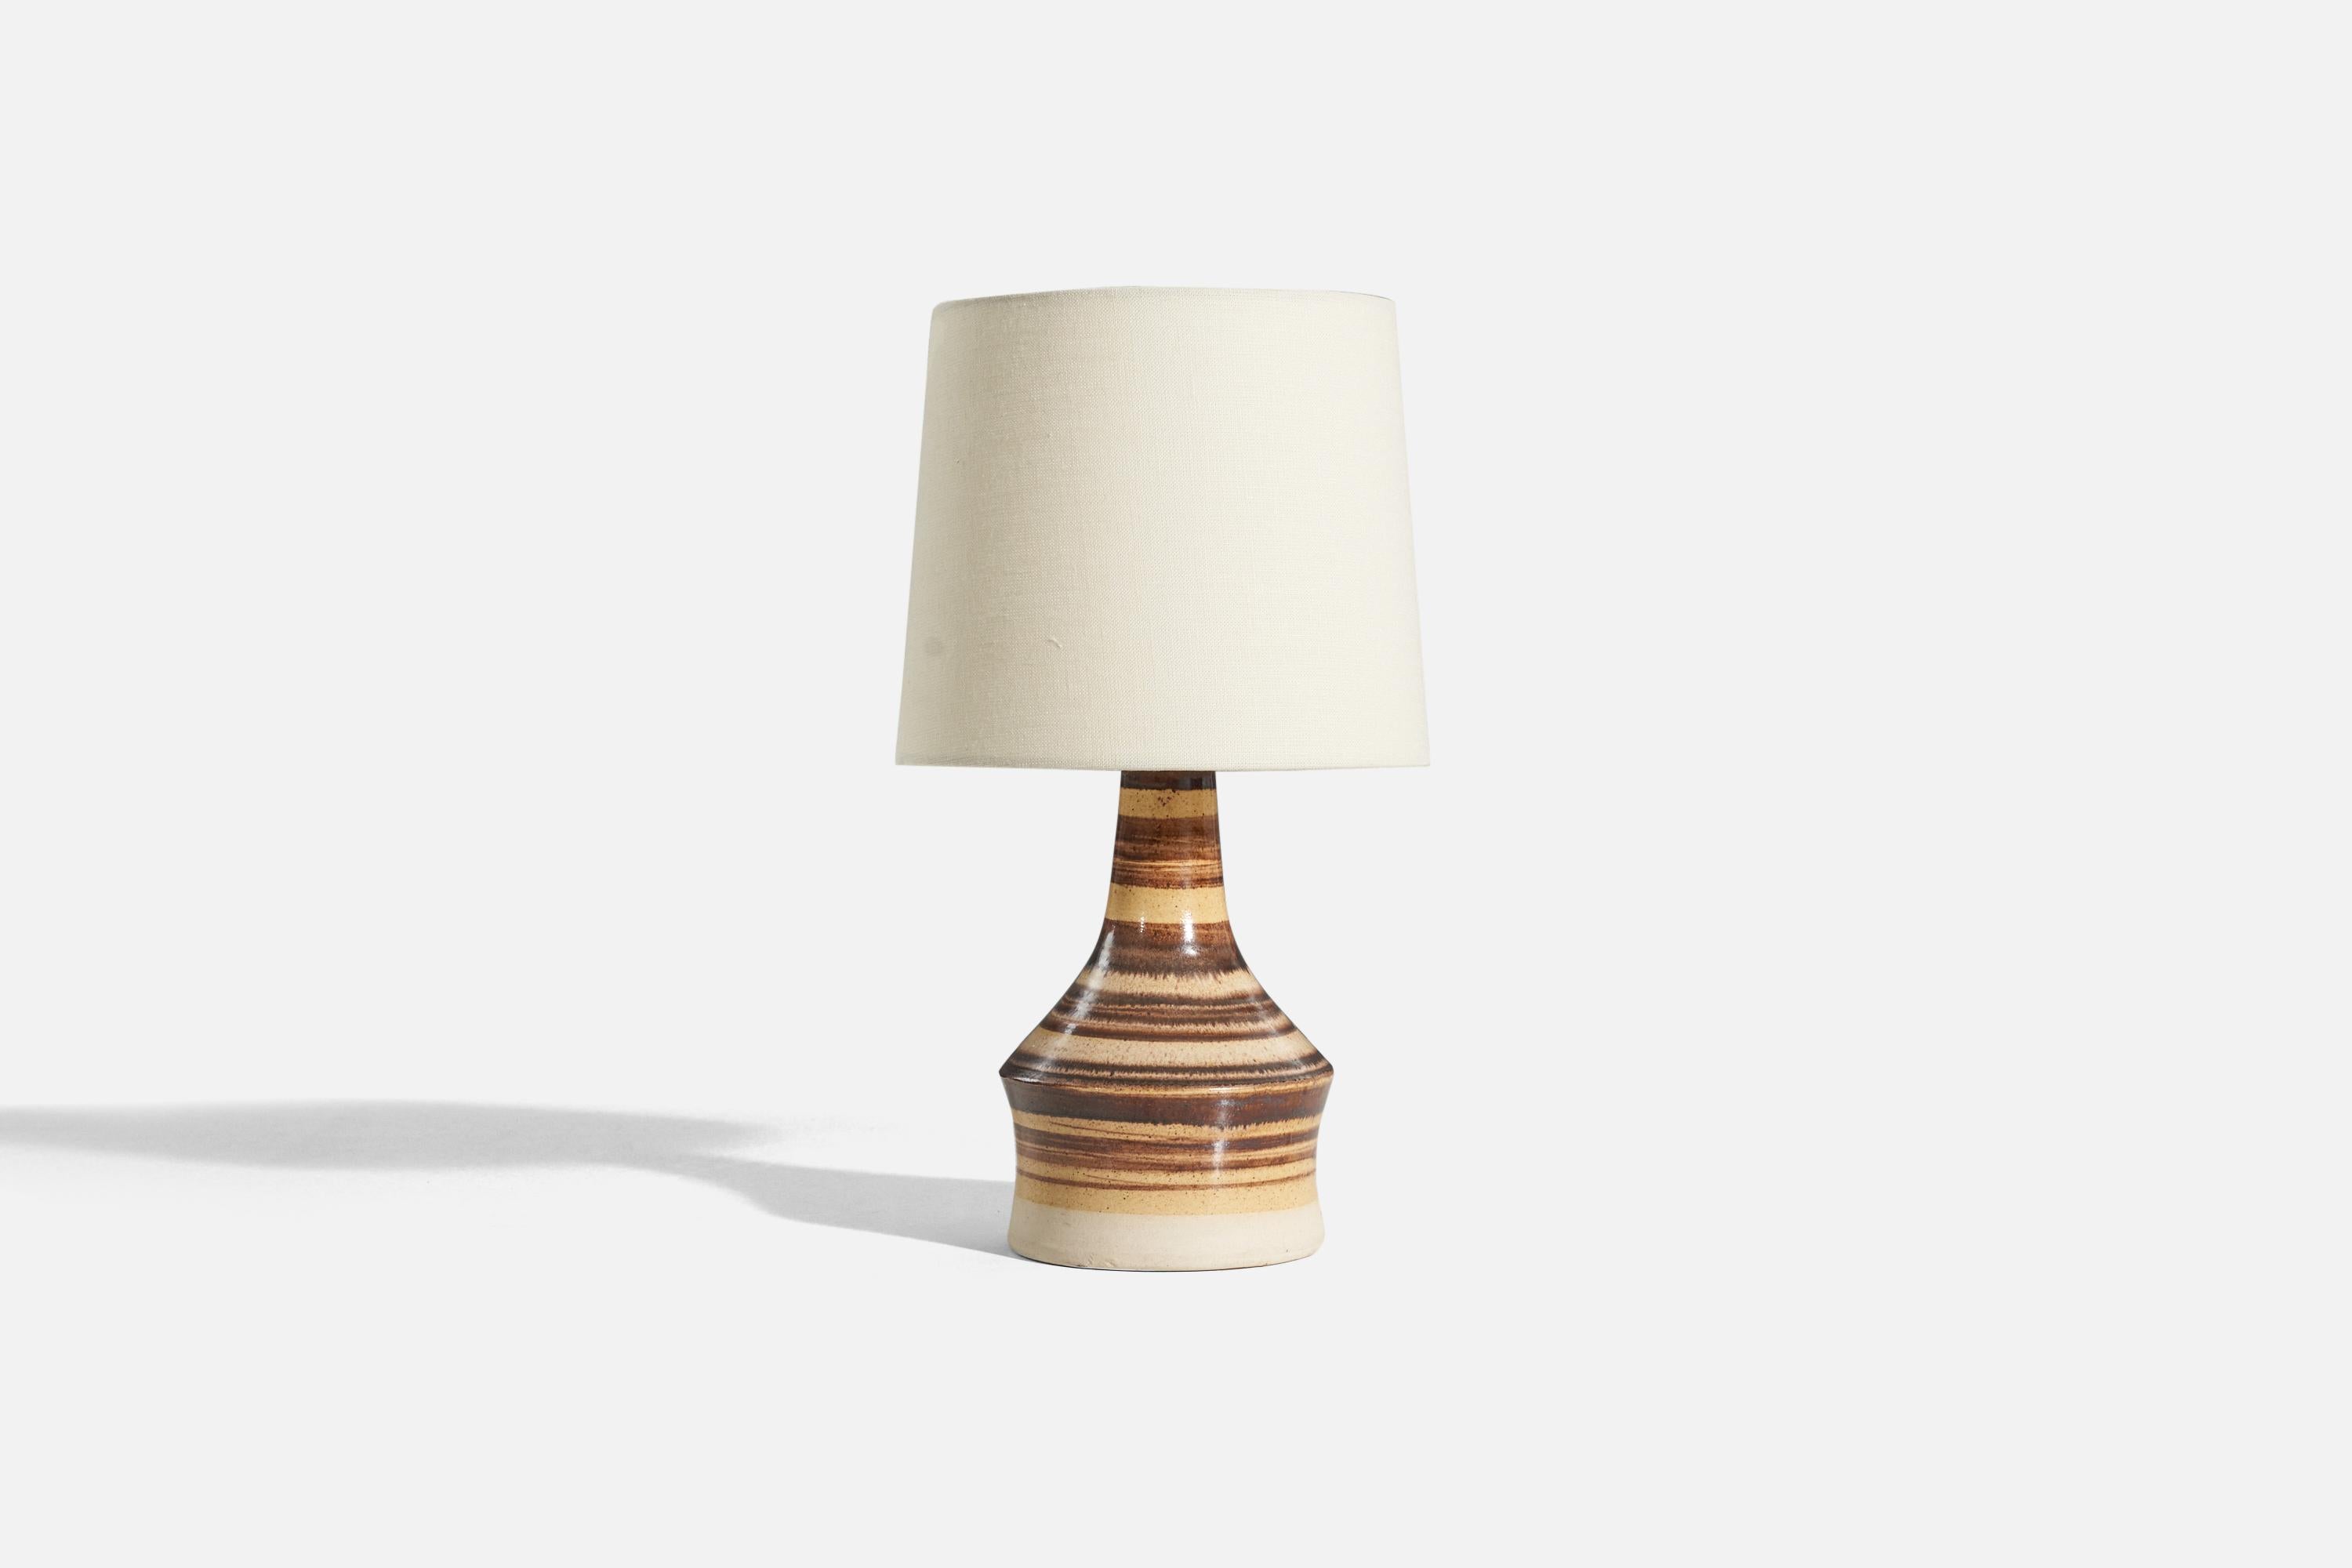 A striped brown-glazed stoneware table lamp designed and produced by Per Engstrøm, Denmark, 1960s.

Sold without lampshade. 
Dimensions of Lamp (inches) : 10.75 x 5 x 5 (H x W x D)
Dimensions of Shade (inches) : 7 x 8 x 7 (T x B x H)
Dimension of